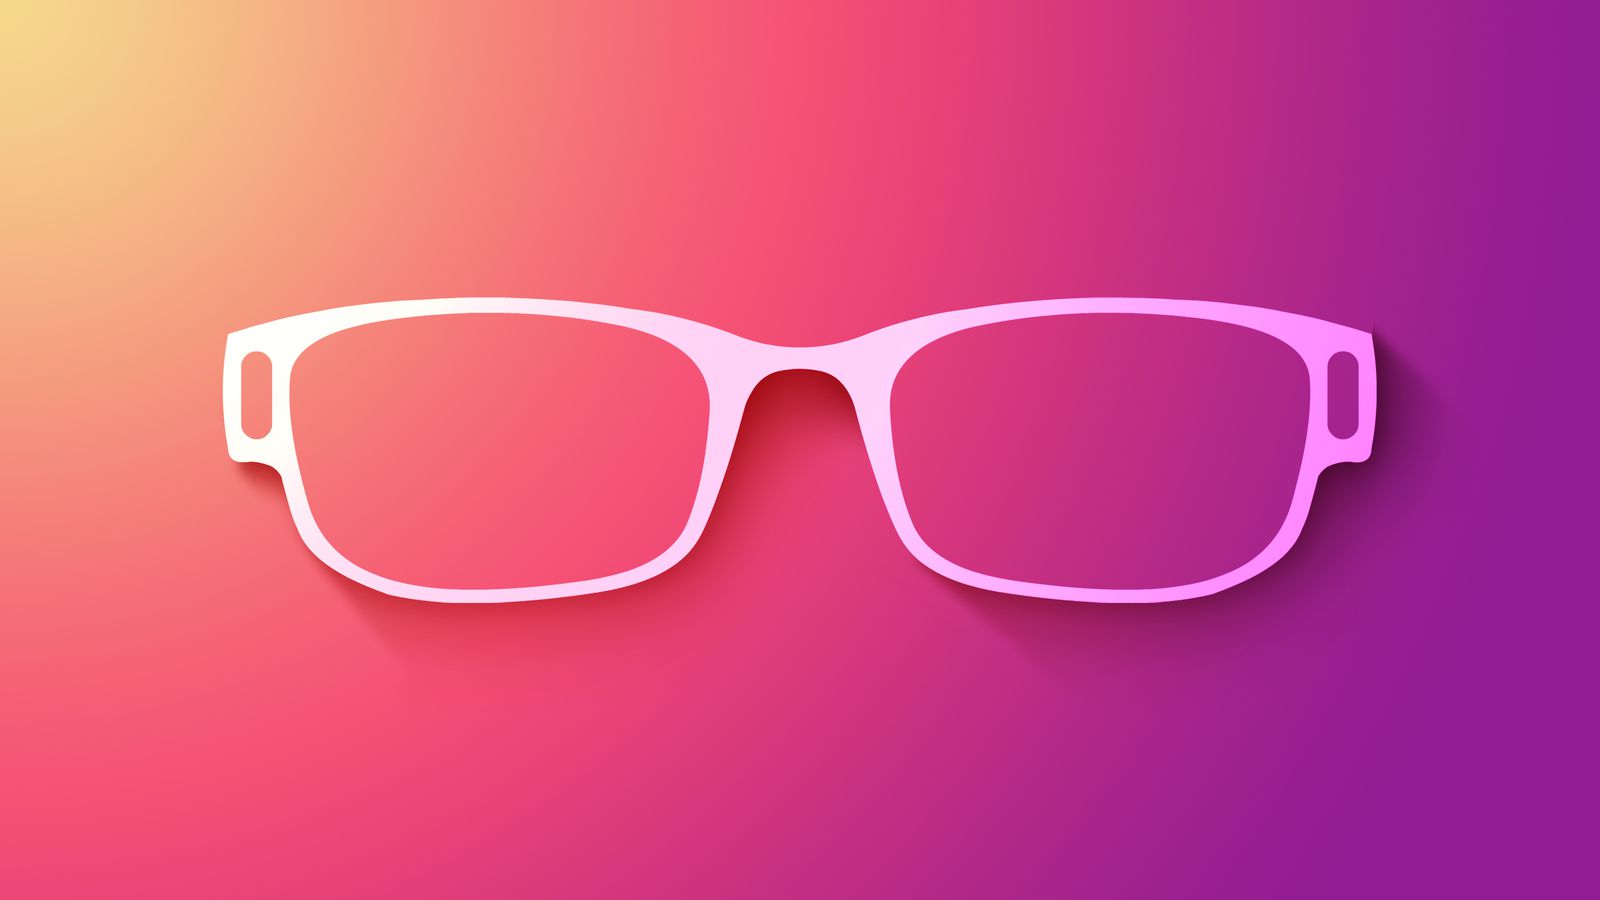 https://images.macrumors.com/t/TQgvltxgxyOin2l4dzrmJ-t1znA=/1600x0/article-new/2021/01/Apple-Glasses-Triad-Feature.jpg